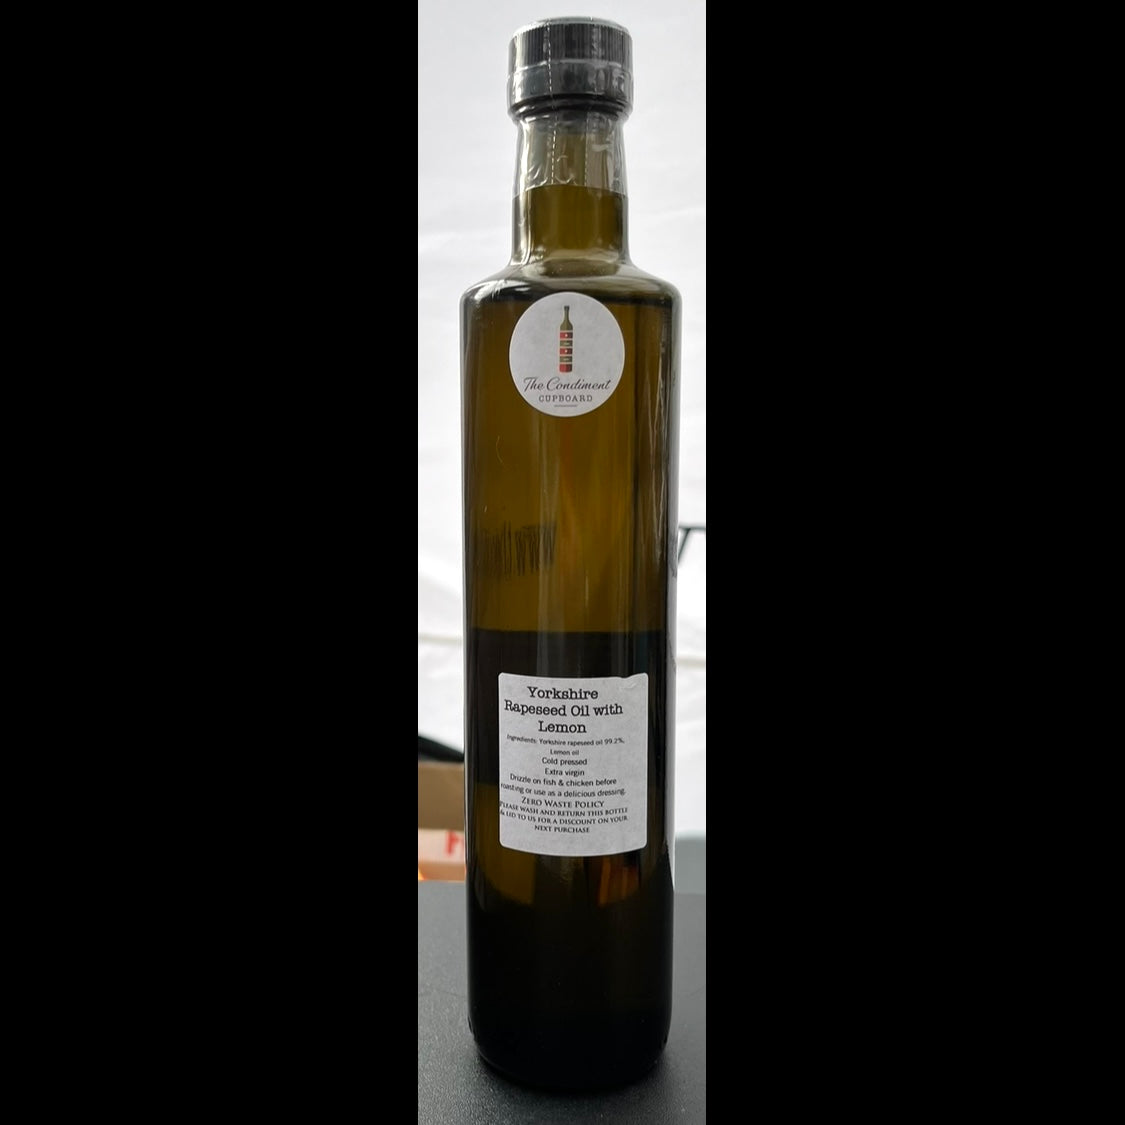 Yorkshire Rapeseed Oil with Lemon